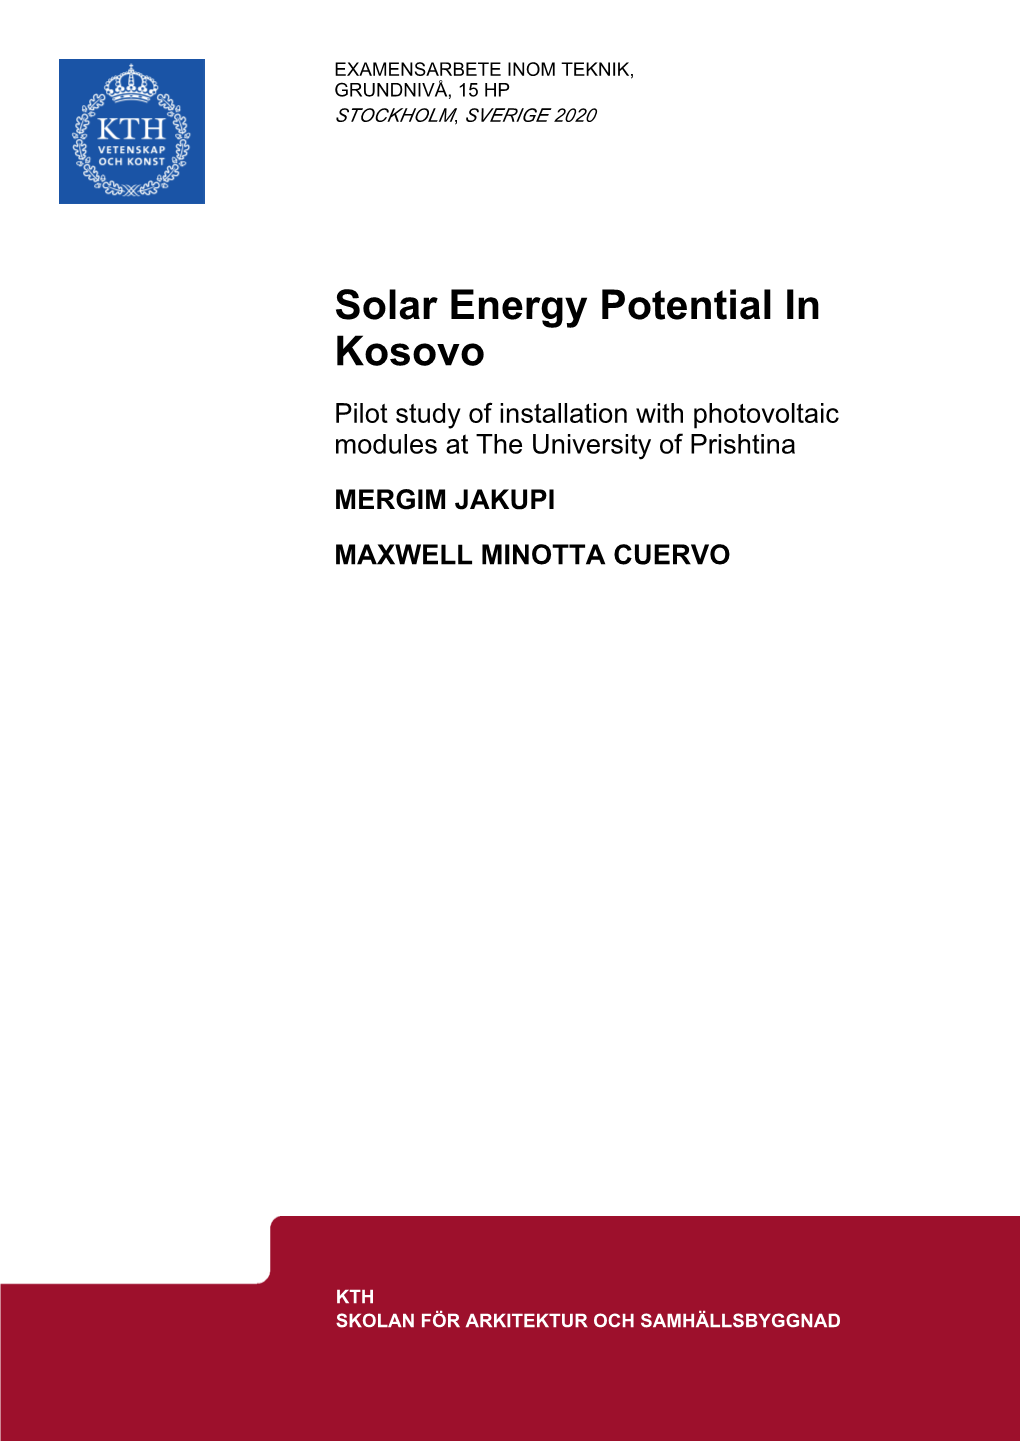 Solar Energy Potential in Kosovo Pilot Study of Installation with Photovoltaic Modules at the University of Prishtina